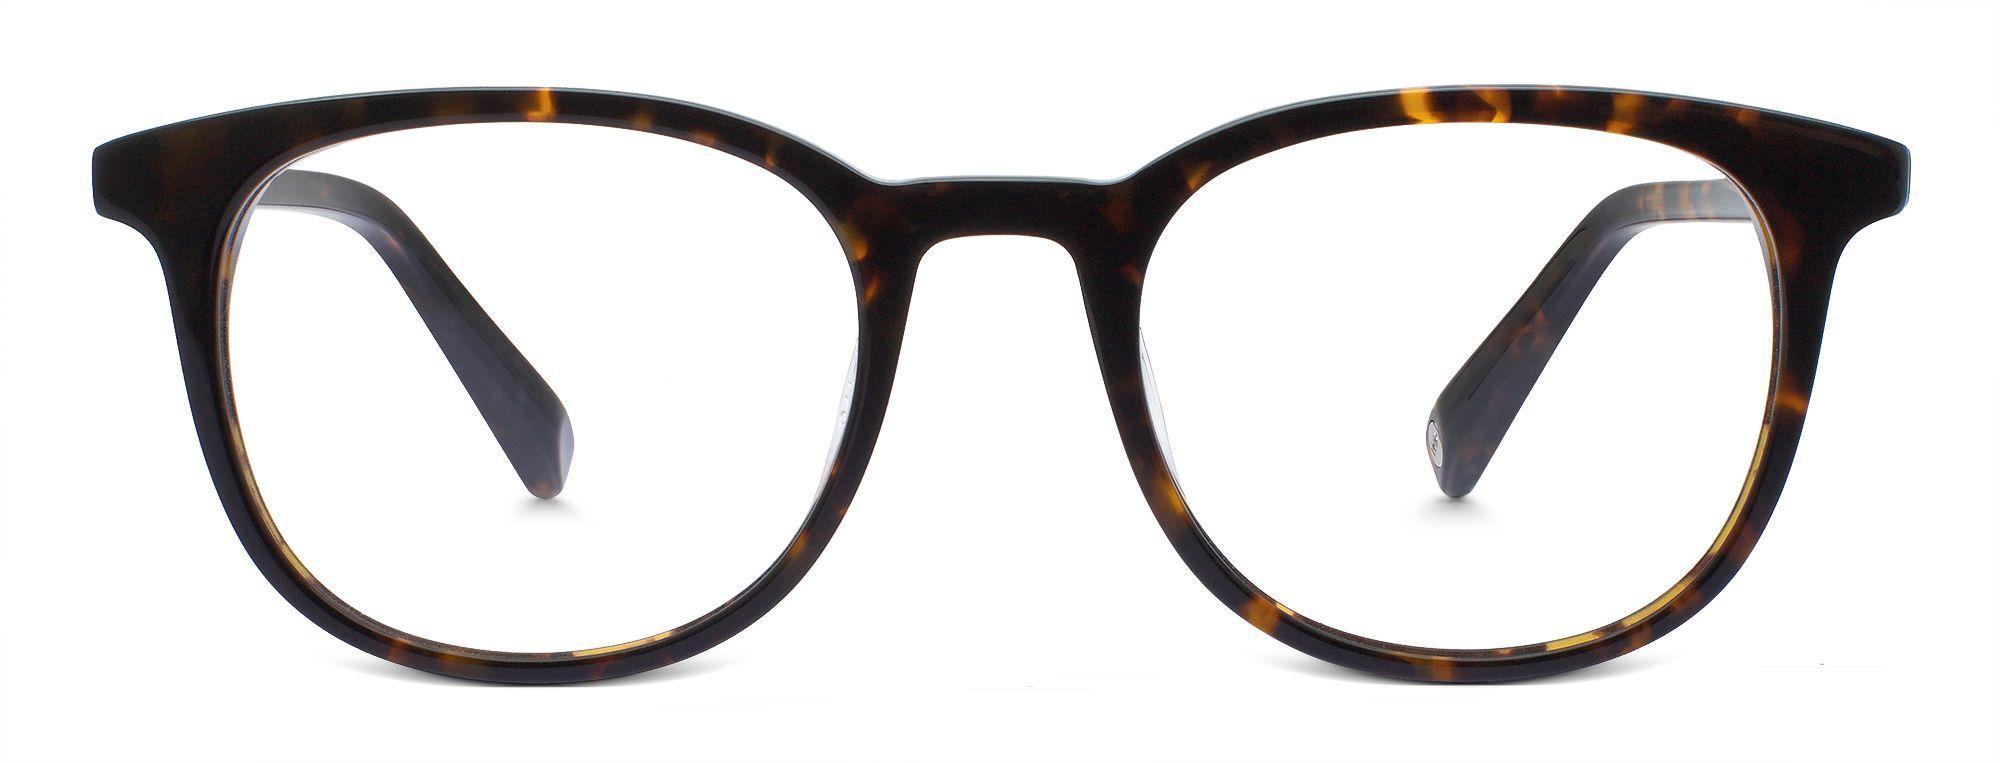 Warby Parker Logo - Durand Eyeglasses in Whiskey Tortoise for Women | Warby Parker